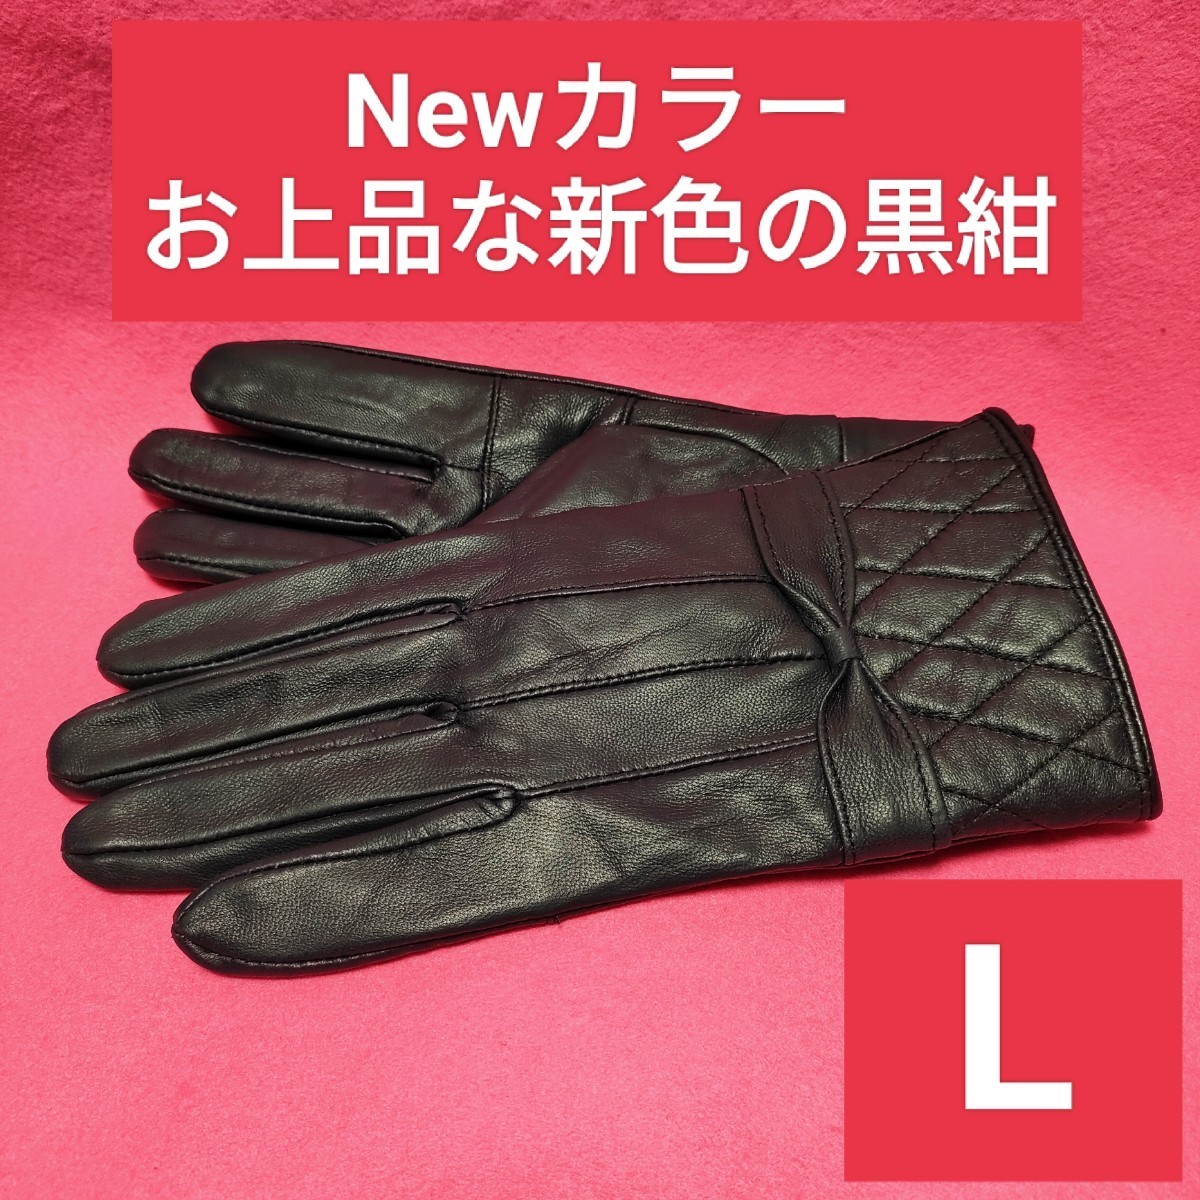  free shipping with translation article limit [ today limitation price cut ]4888-1500 high class ram leather lady's gloves new color. black navy blue L size 